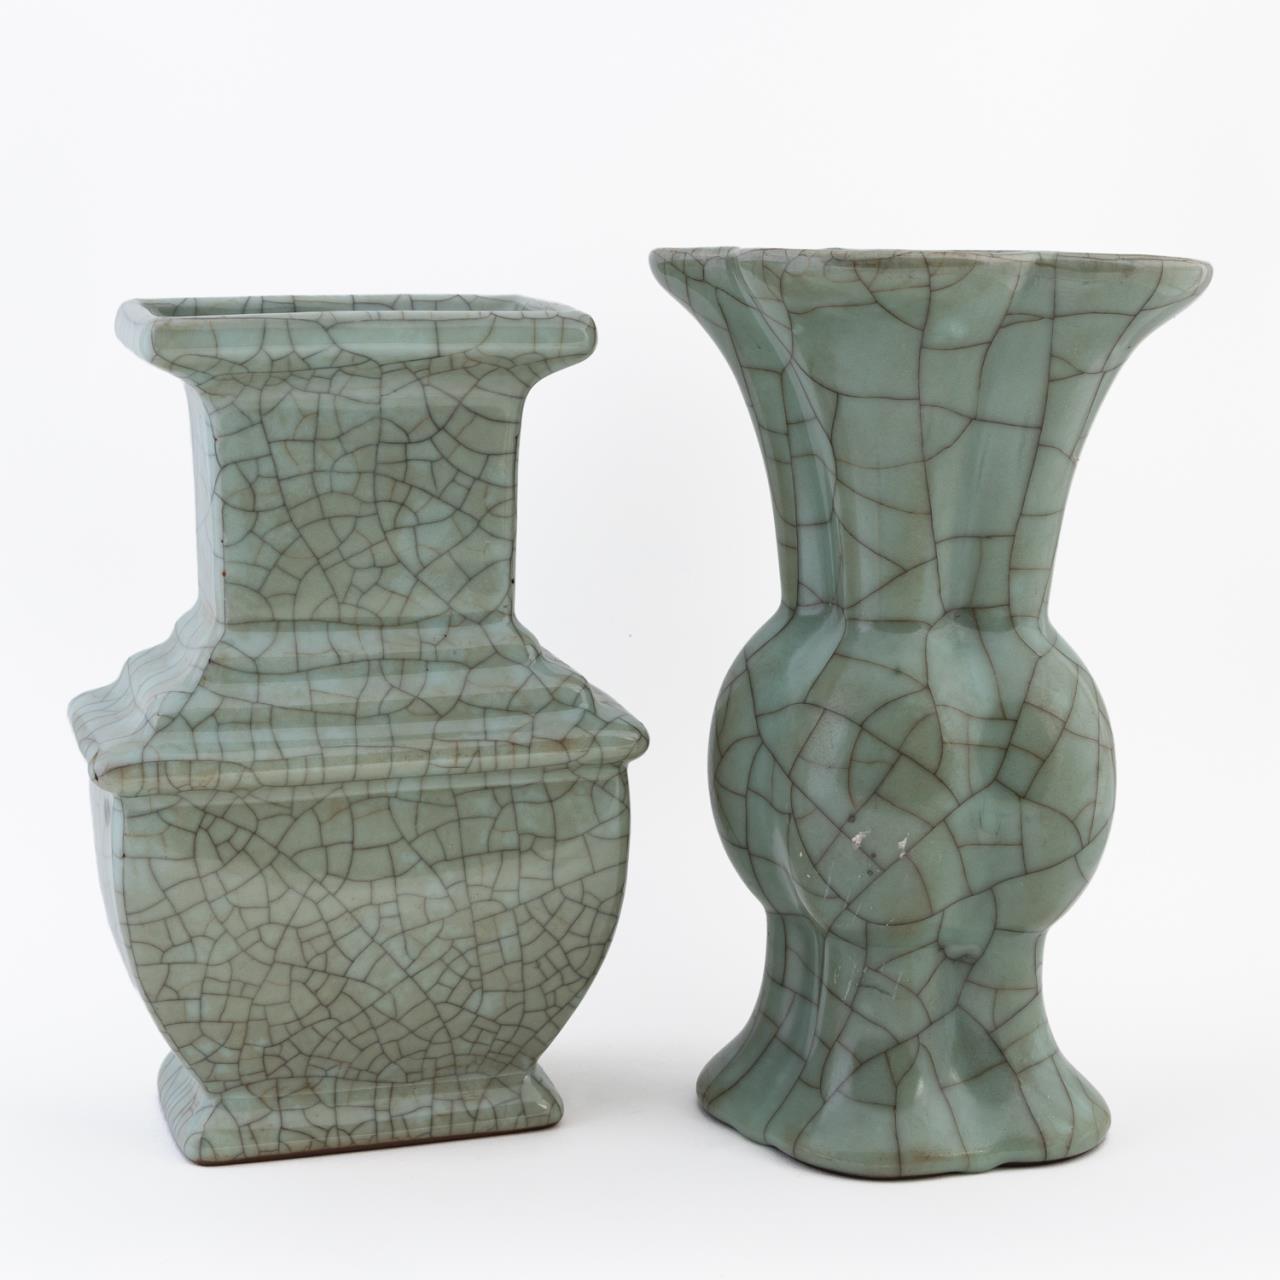 TWO CHINESE GE STYLE CELADON POTTERY